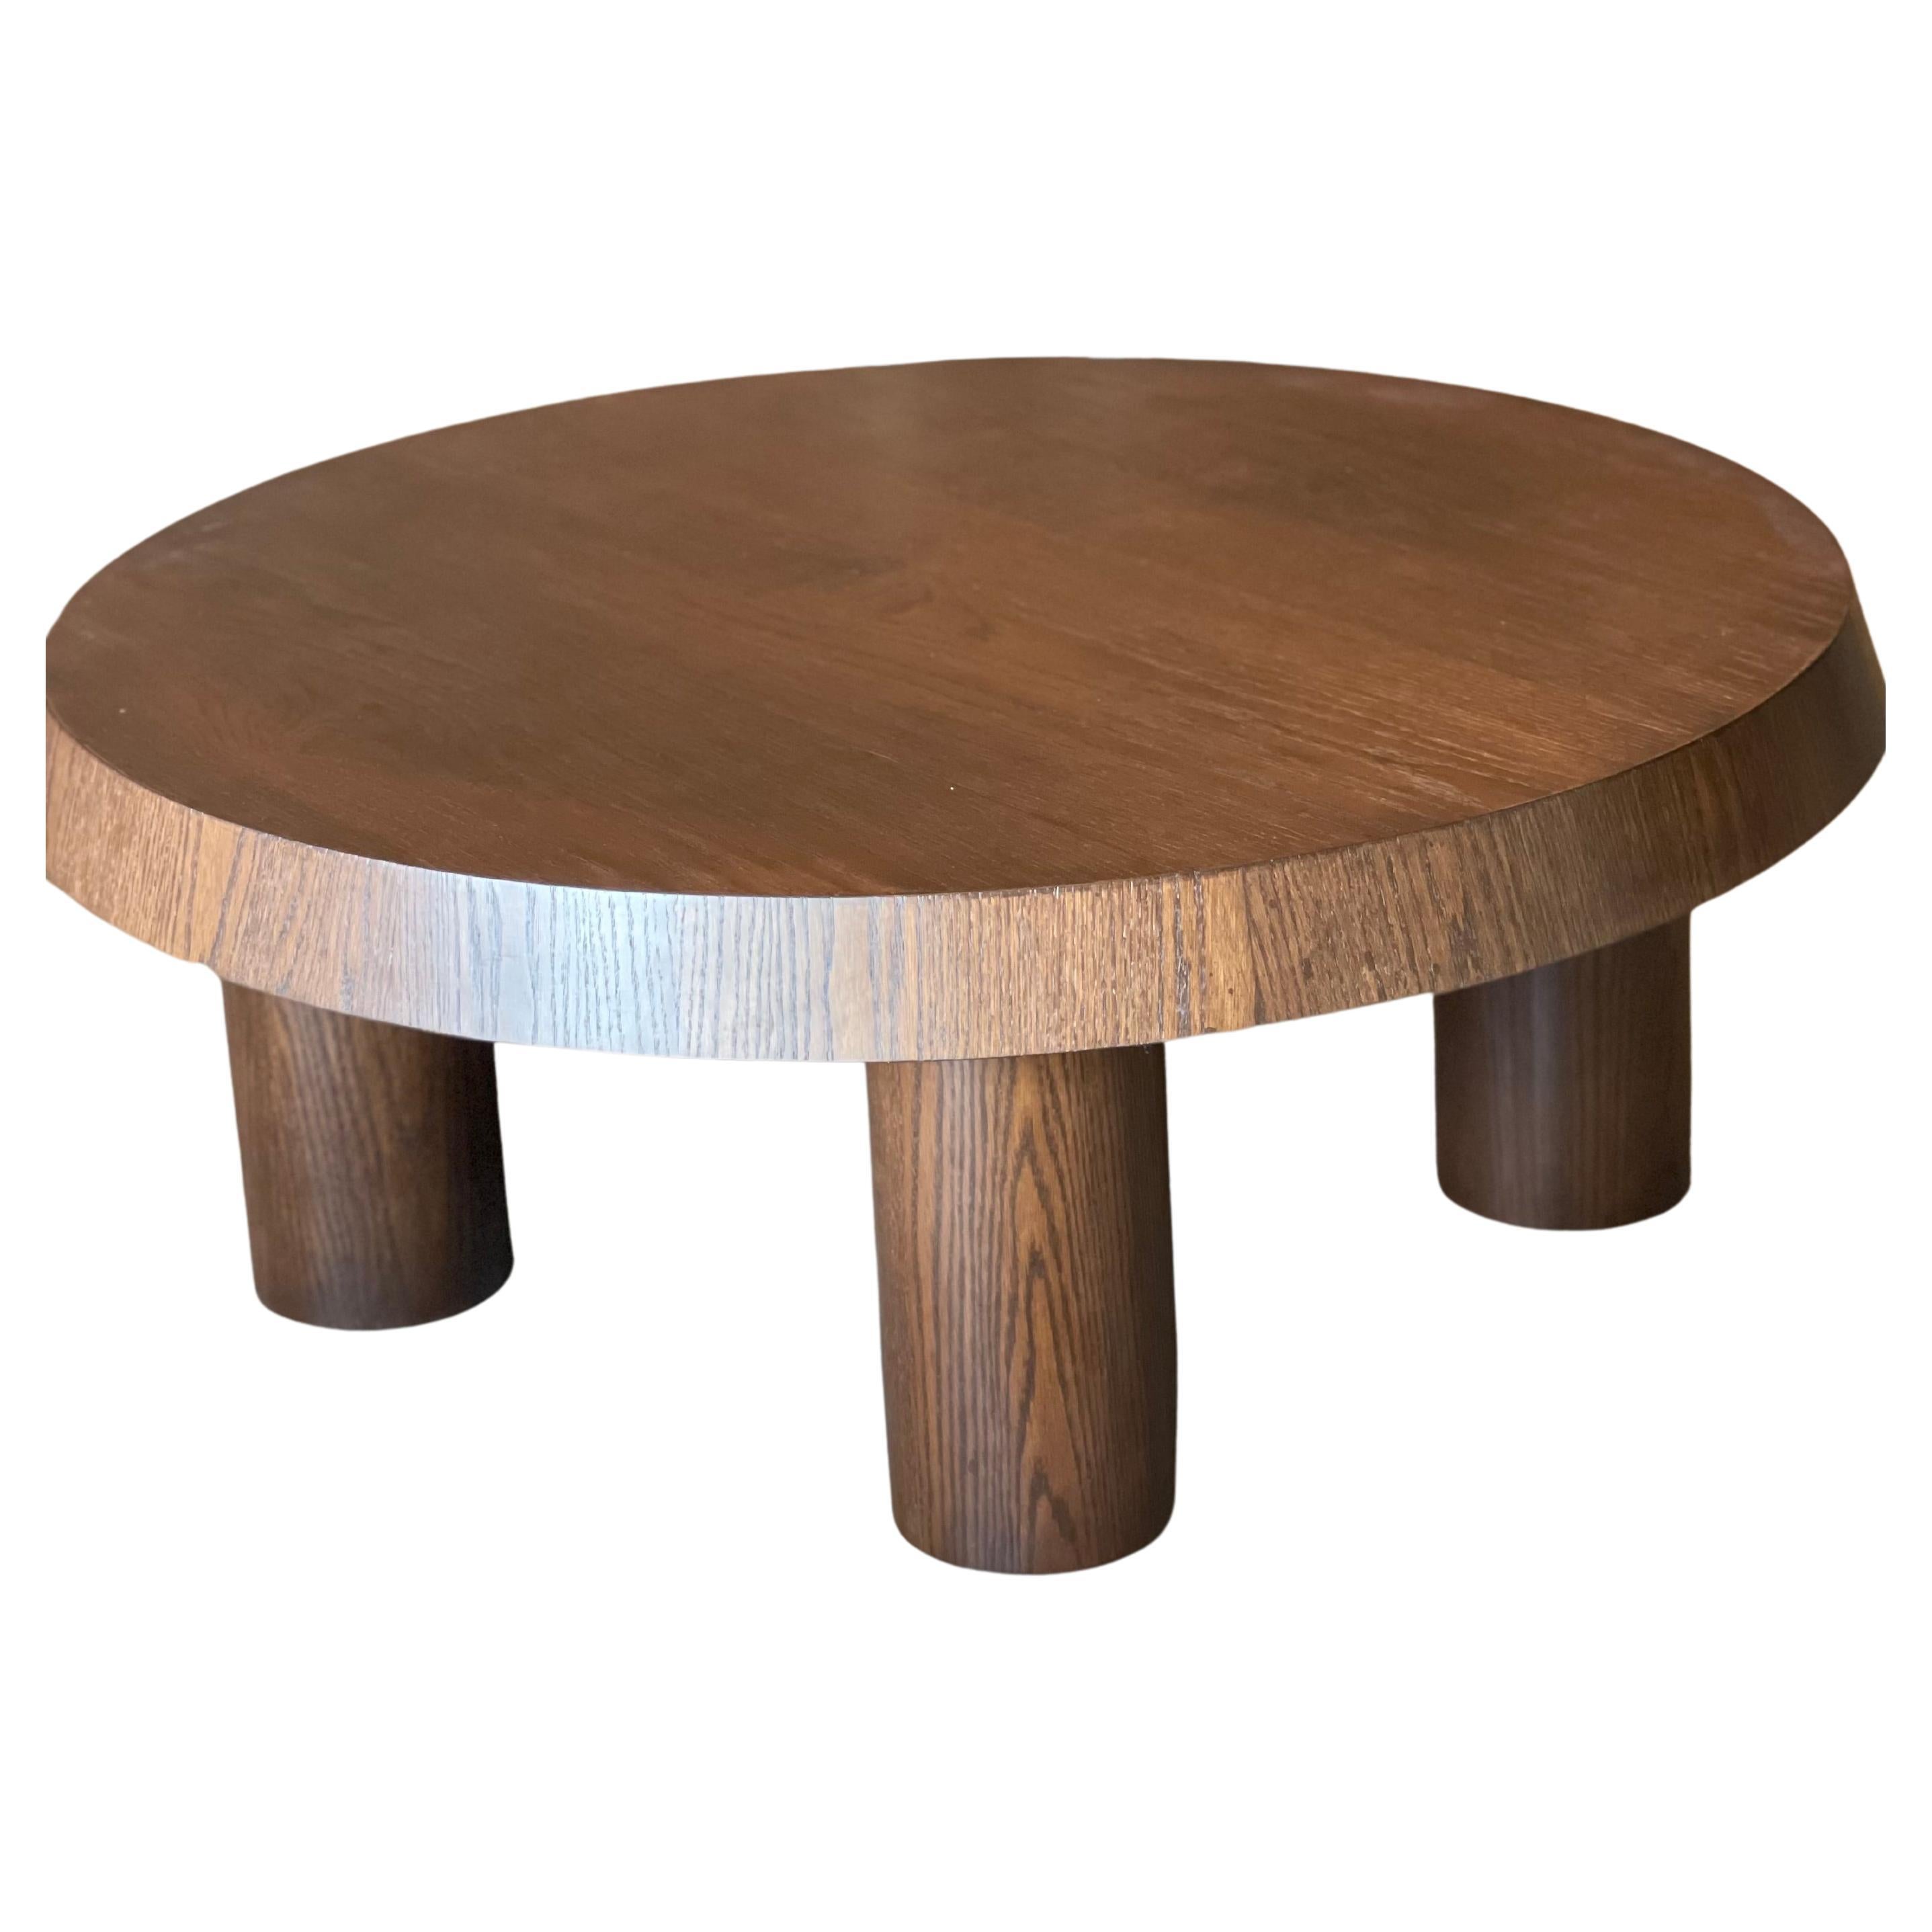 Studio OSKLO Cubist Coffee Table with Round Top, Cylindric Legs in Dark Stain For Sale